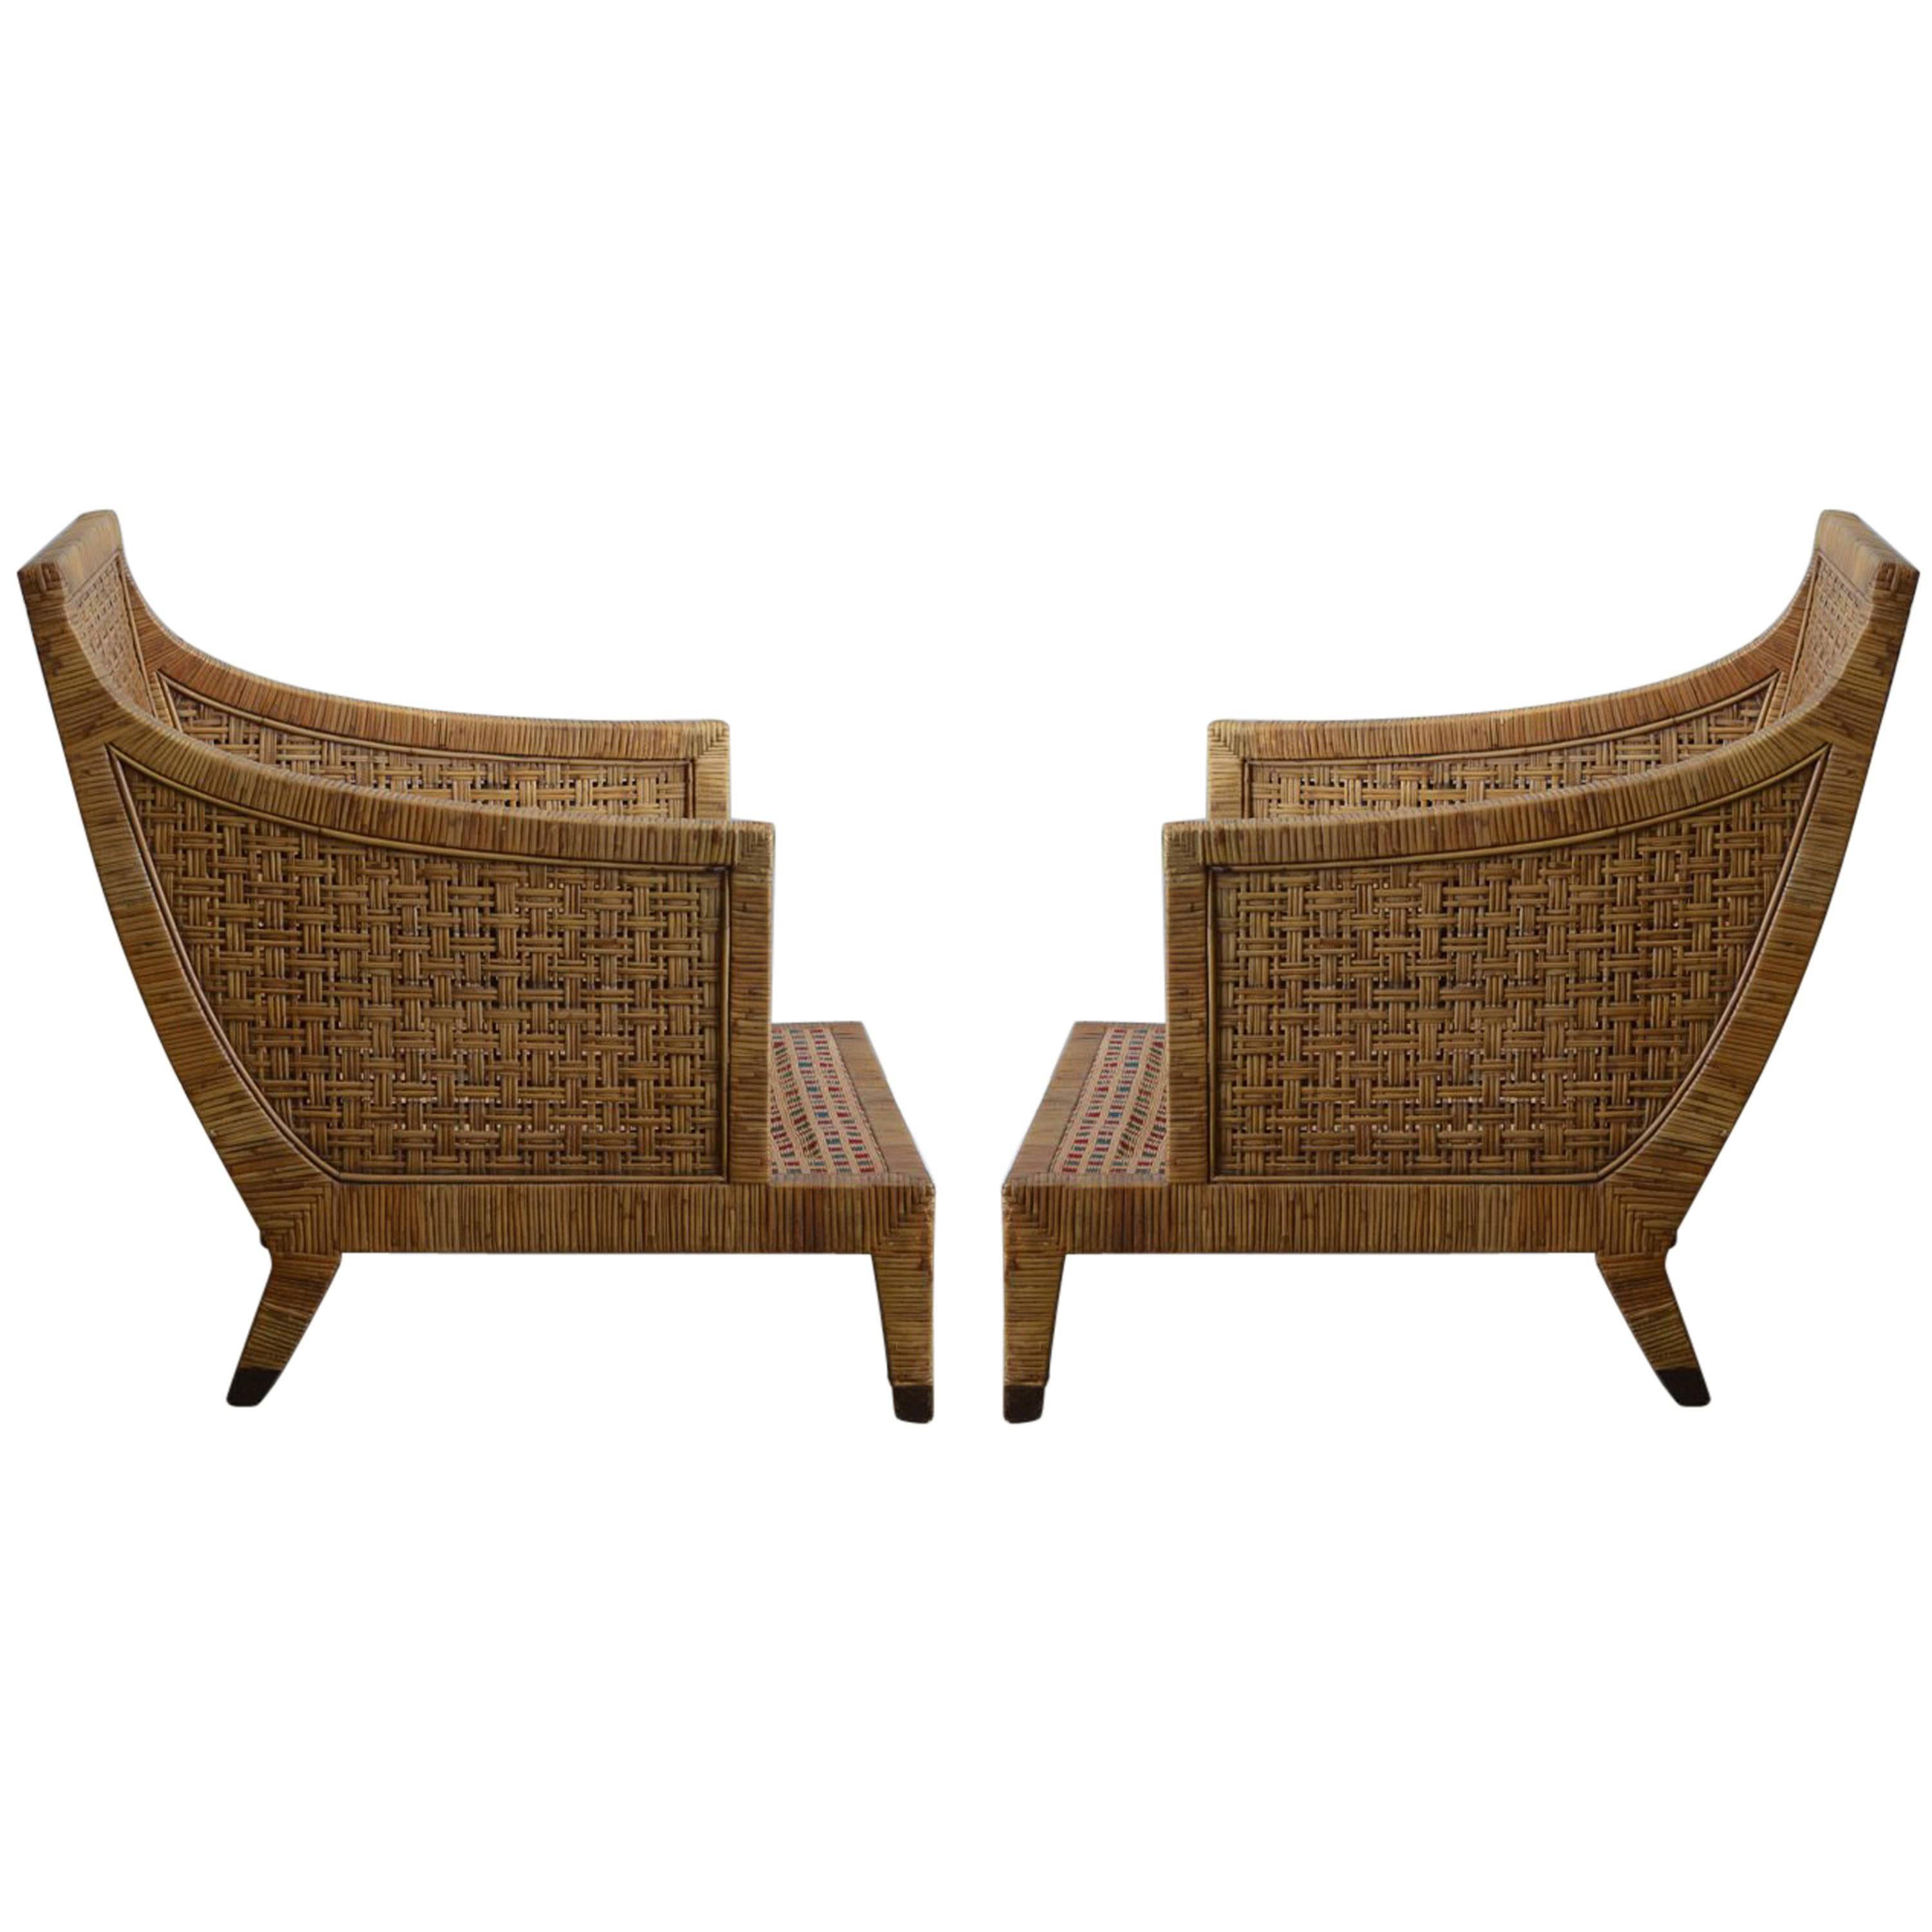 Impressive Pair of Caned Lounge Chairs by McGuire